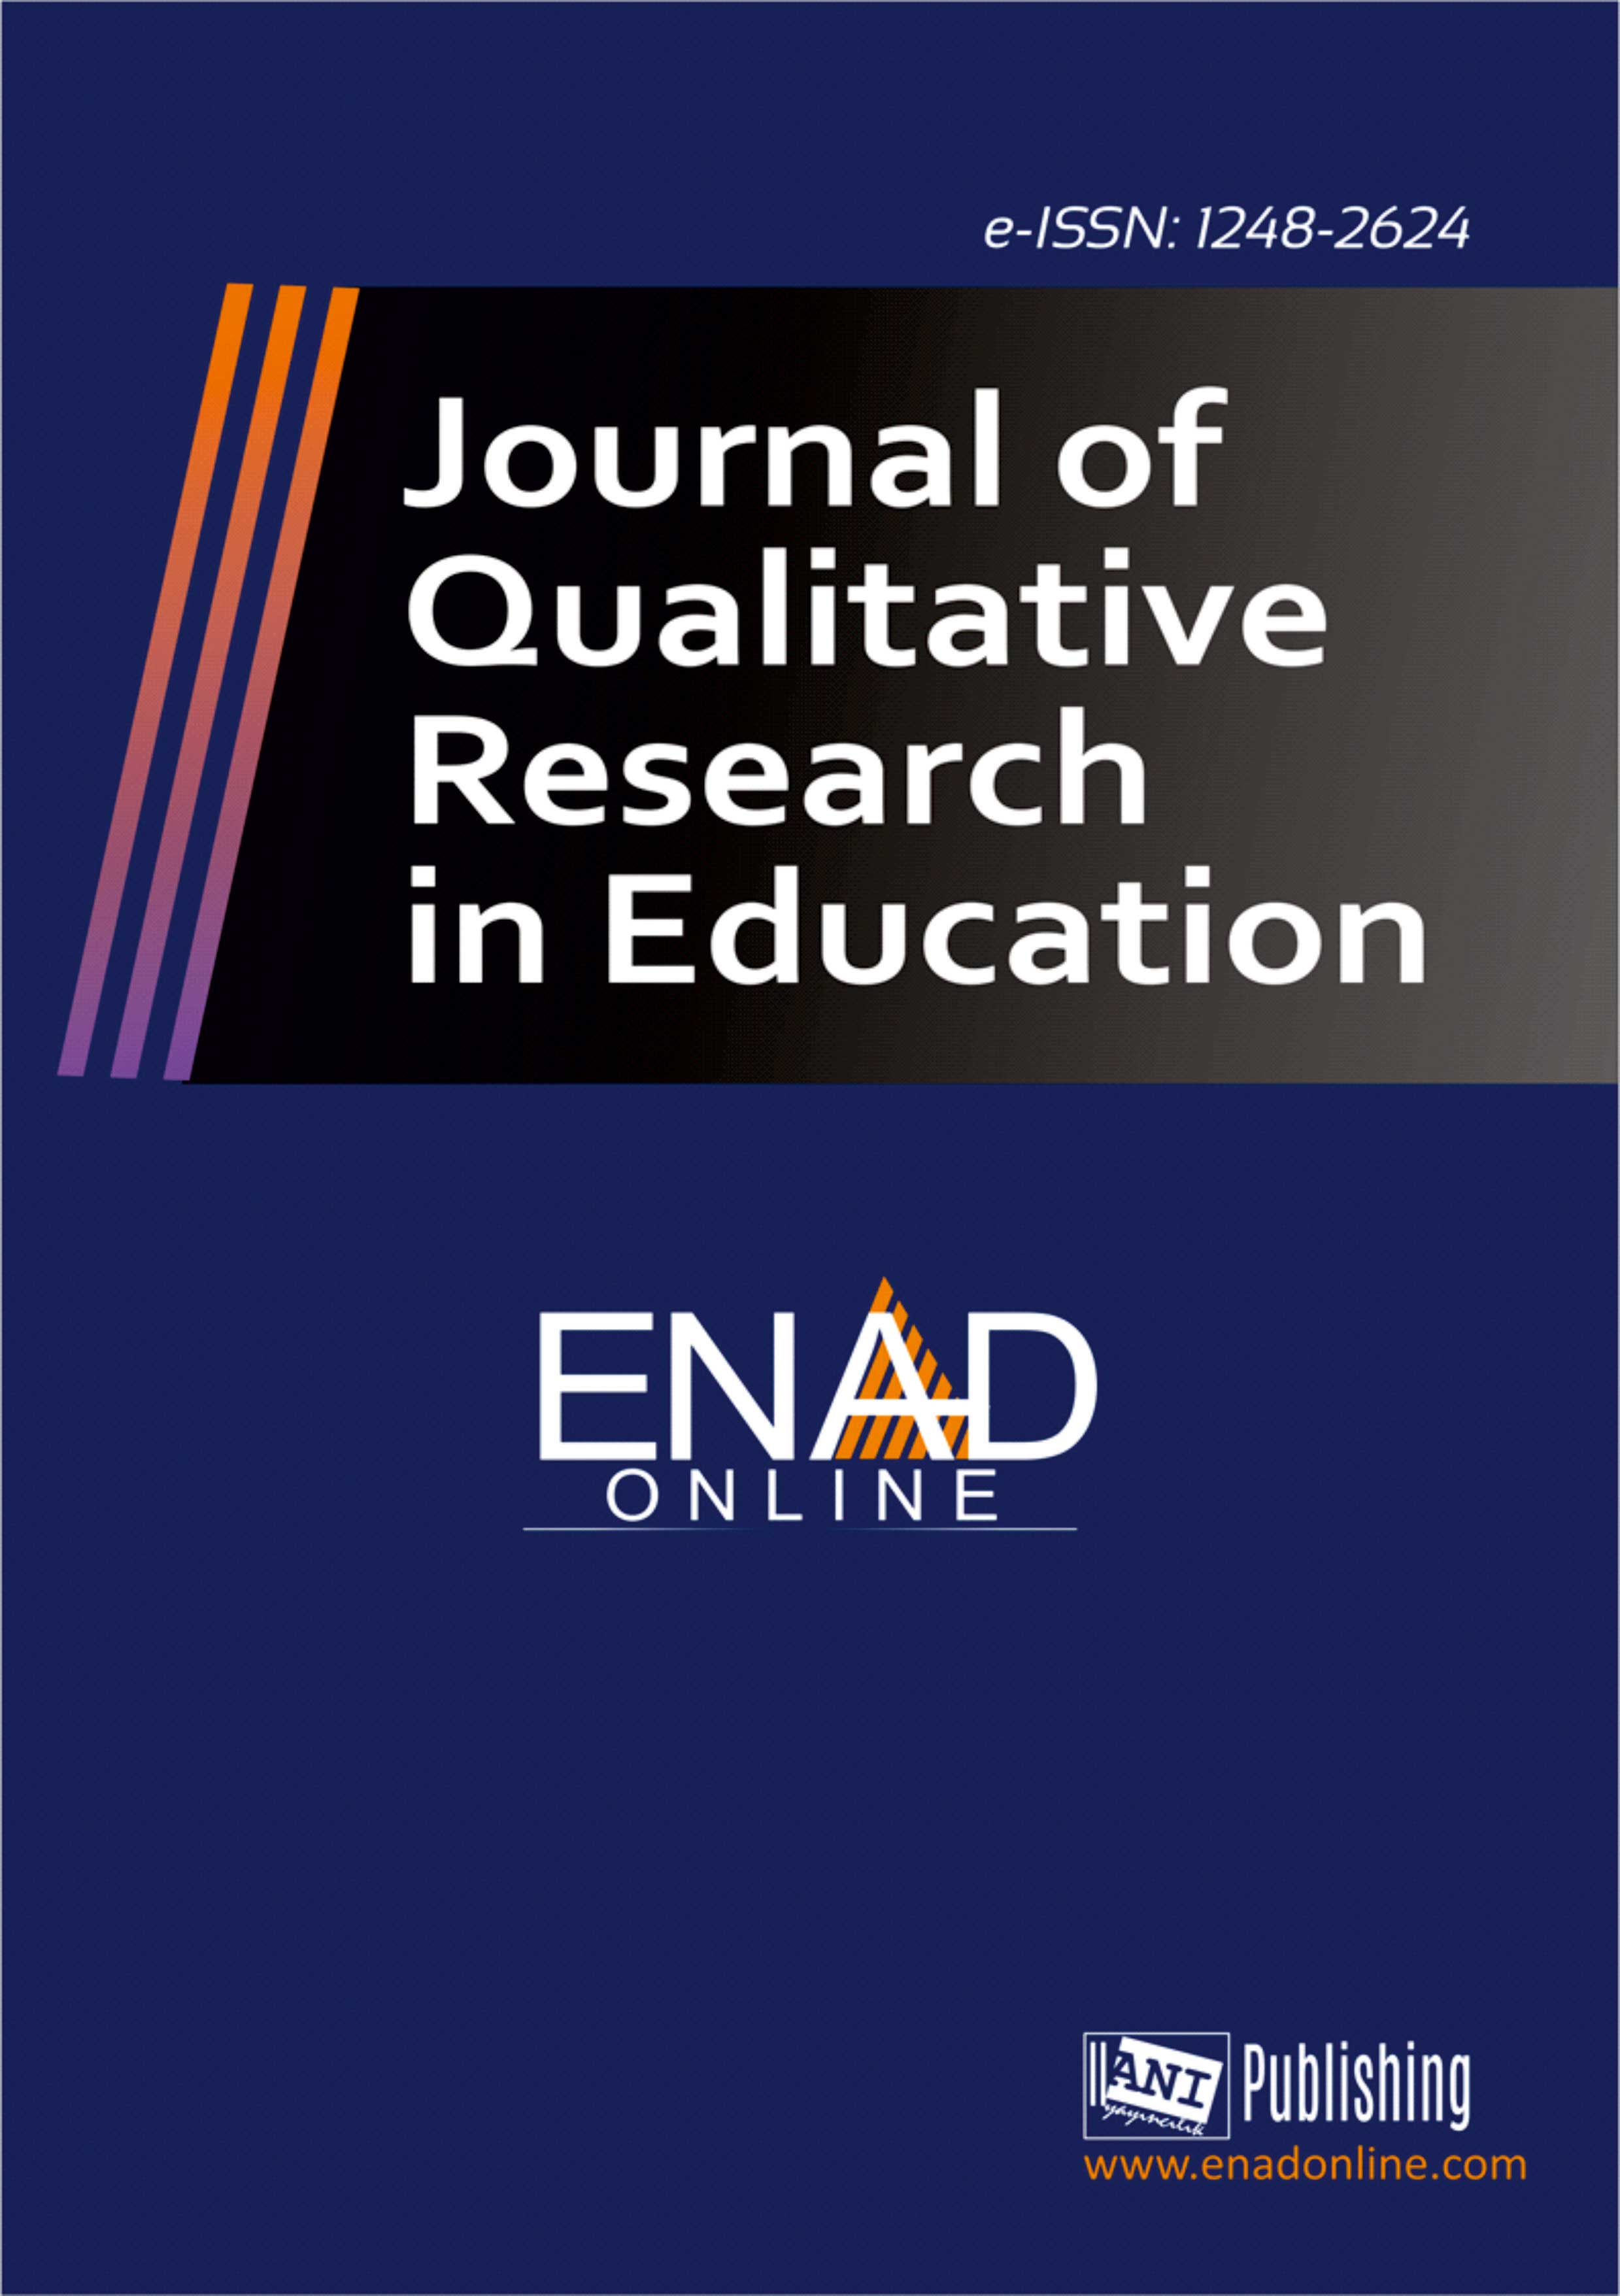 					View Vol. 7 Issue 4 (2019):  Journal of Qualitative Research in Education
				